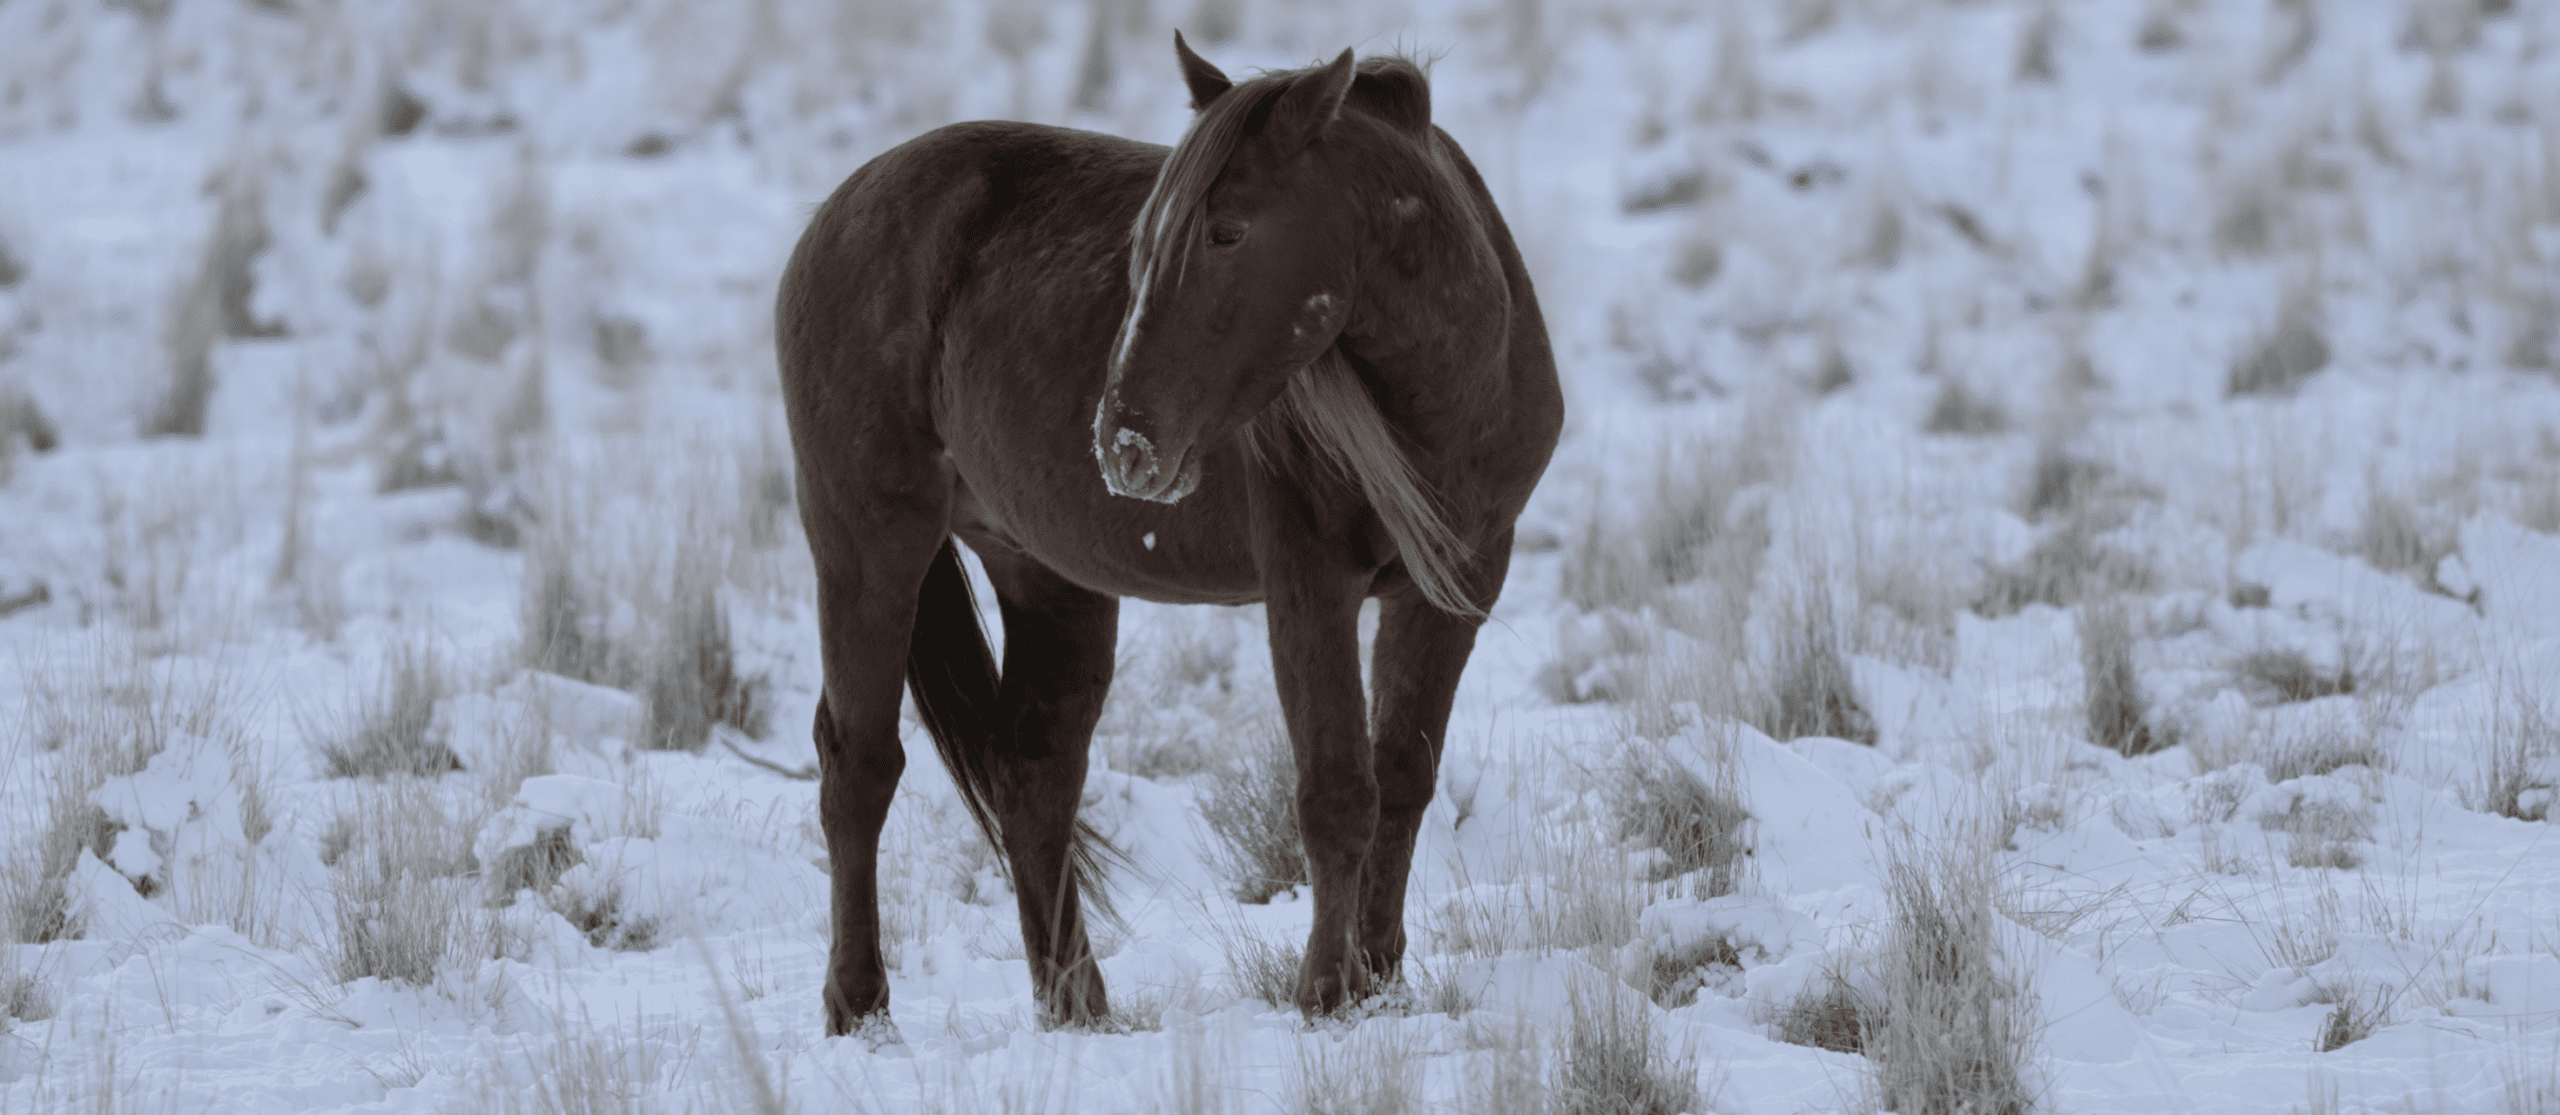 Chestnut Mustang in the Snow from Wild Beauty: Mustang Spirit of the West